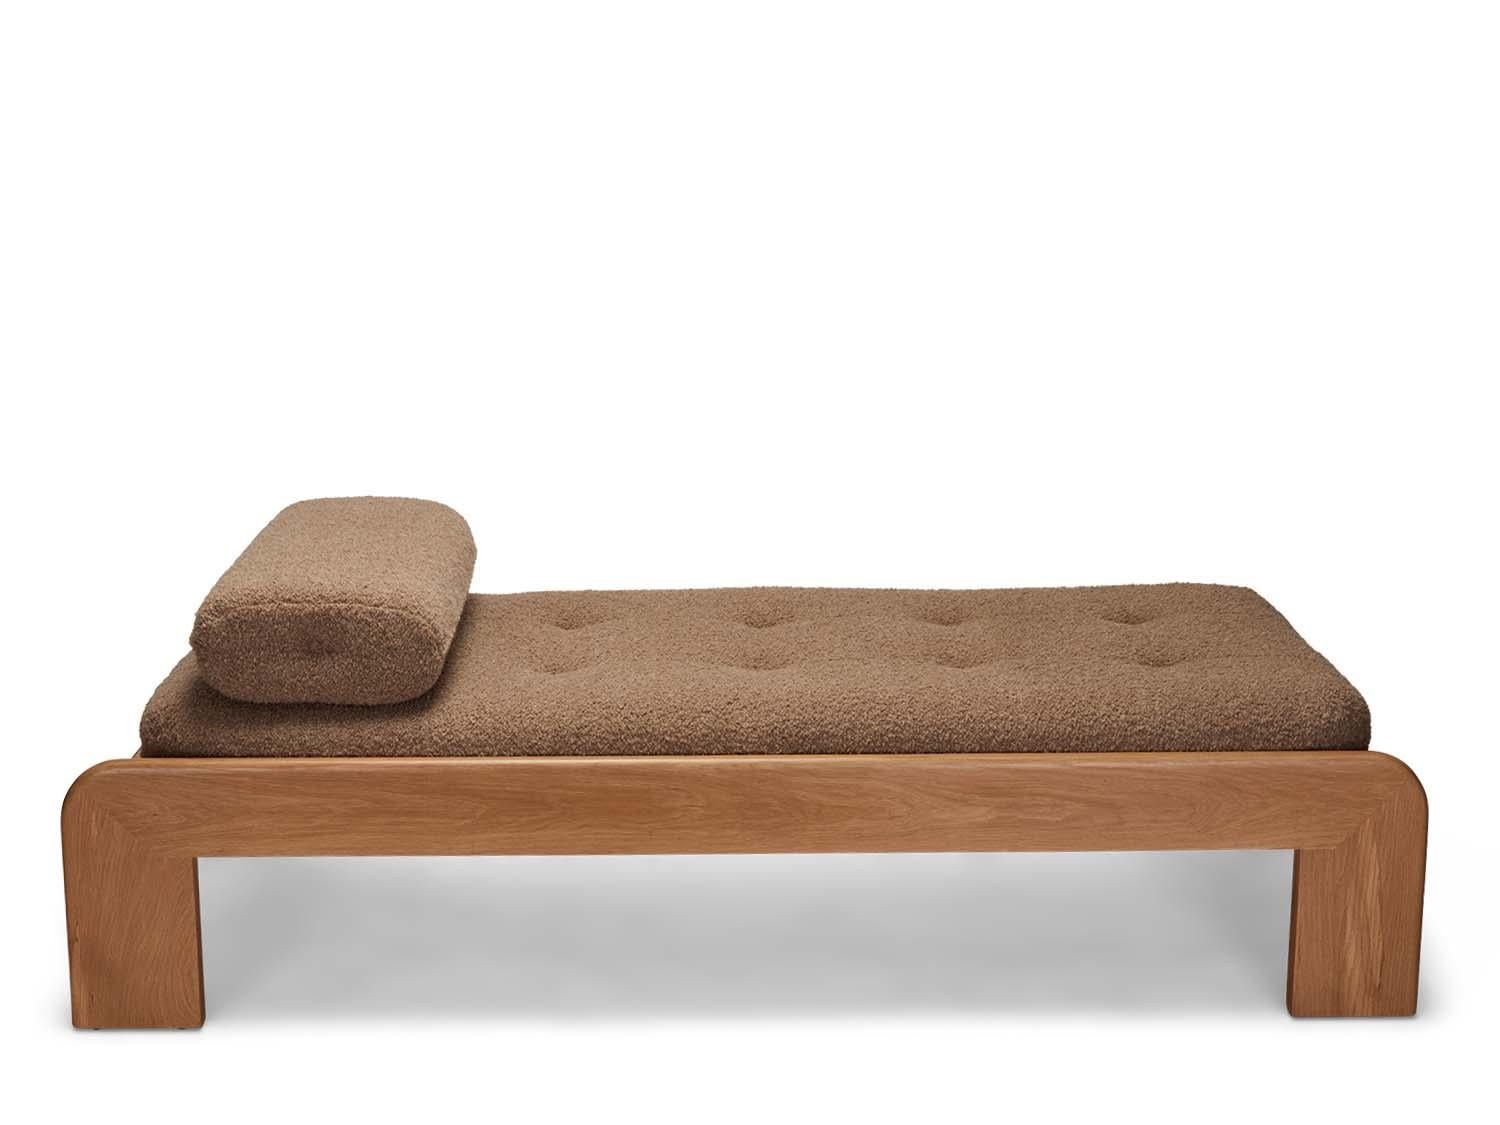 Oak topa daybed by Lawson-Fenning. The Topa daybed features a round over frame handcrafted in American walnut or white oak. The daybed is tufted and comes with a loose bolster pillow. 

 The Lawson-Fenning Collection is designed and handmade in